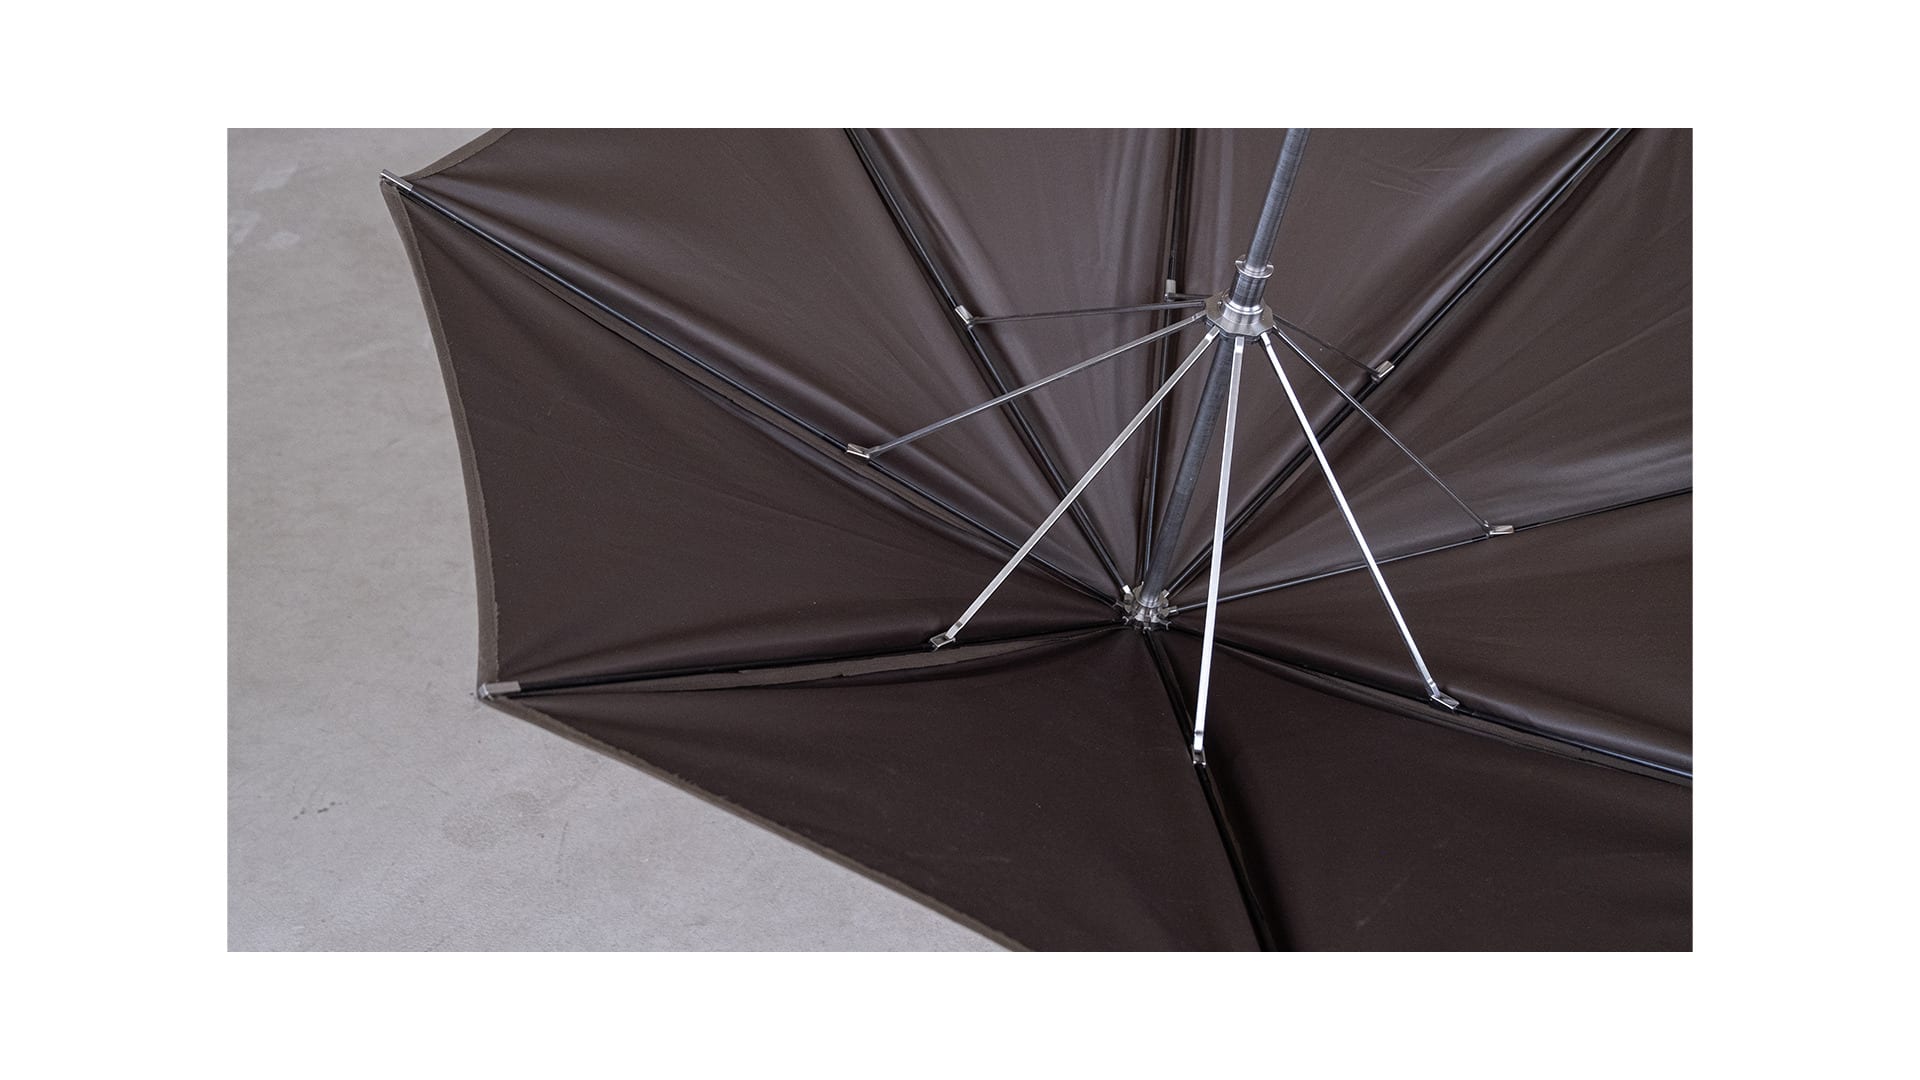 The canopy structure is supported by carbon fibre struts which are highly energy intensive yet very strong and light.